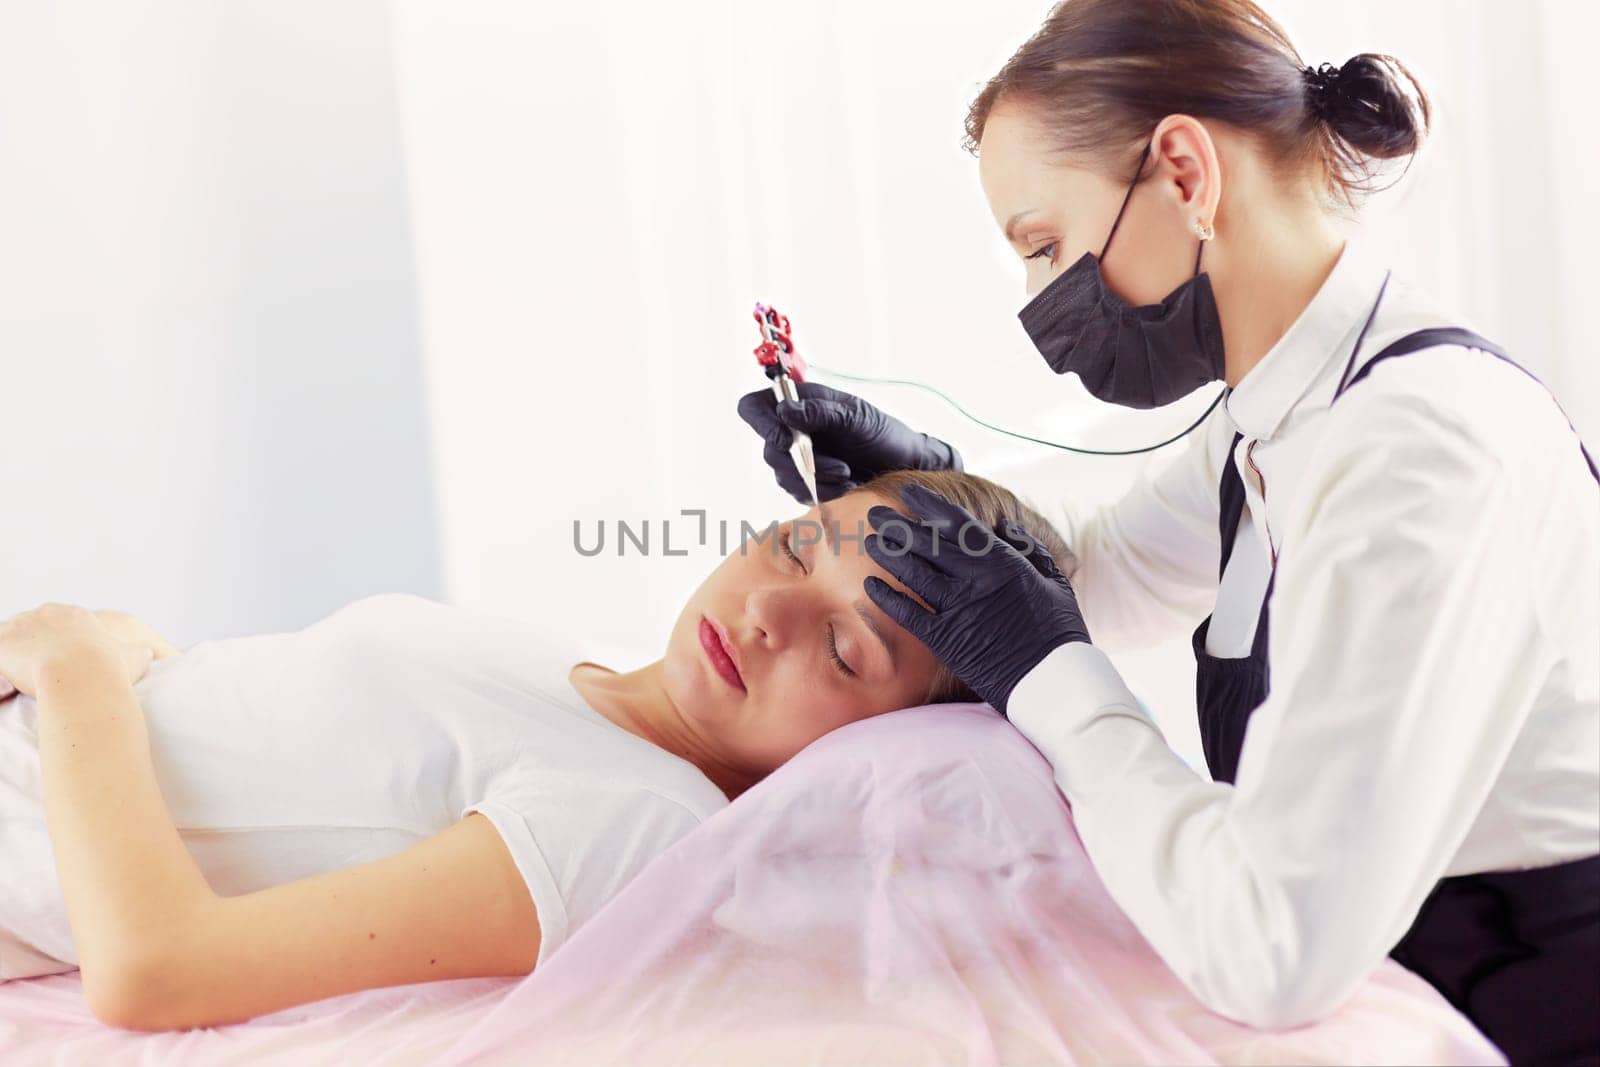 Young woman undergoing procedure of eyebrow permanent makeup in beauty salon by lenets